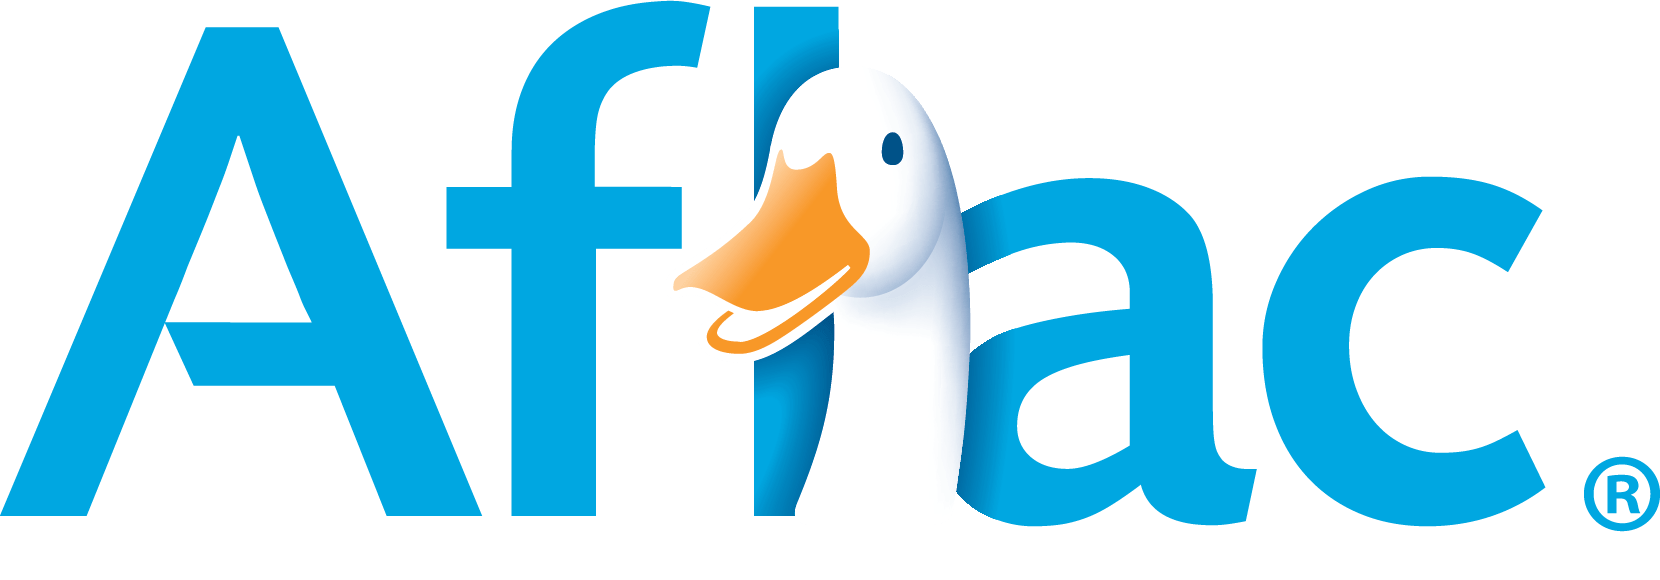 Aflac: Purpose ... With Feathers - Logo - https://s39939.pcdn.co/wp-content/uploads/2020/03/Rep_Aflac.png